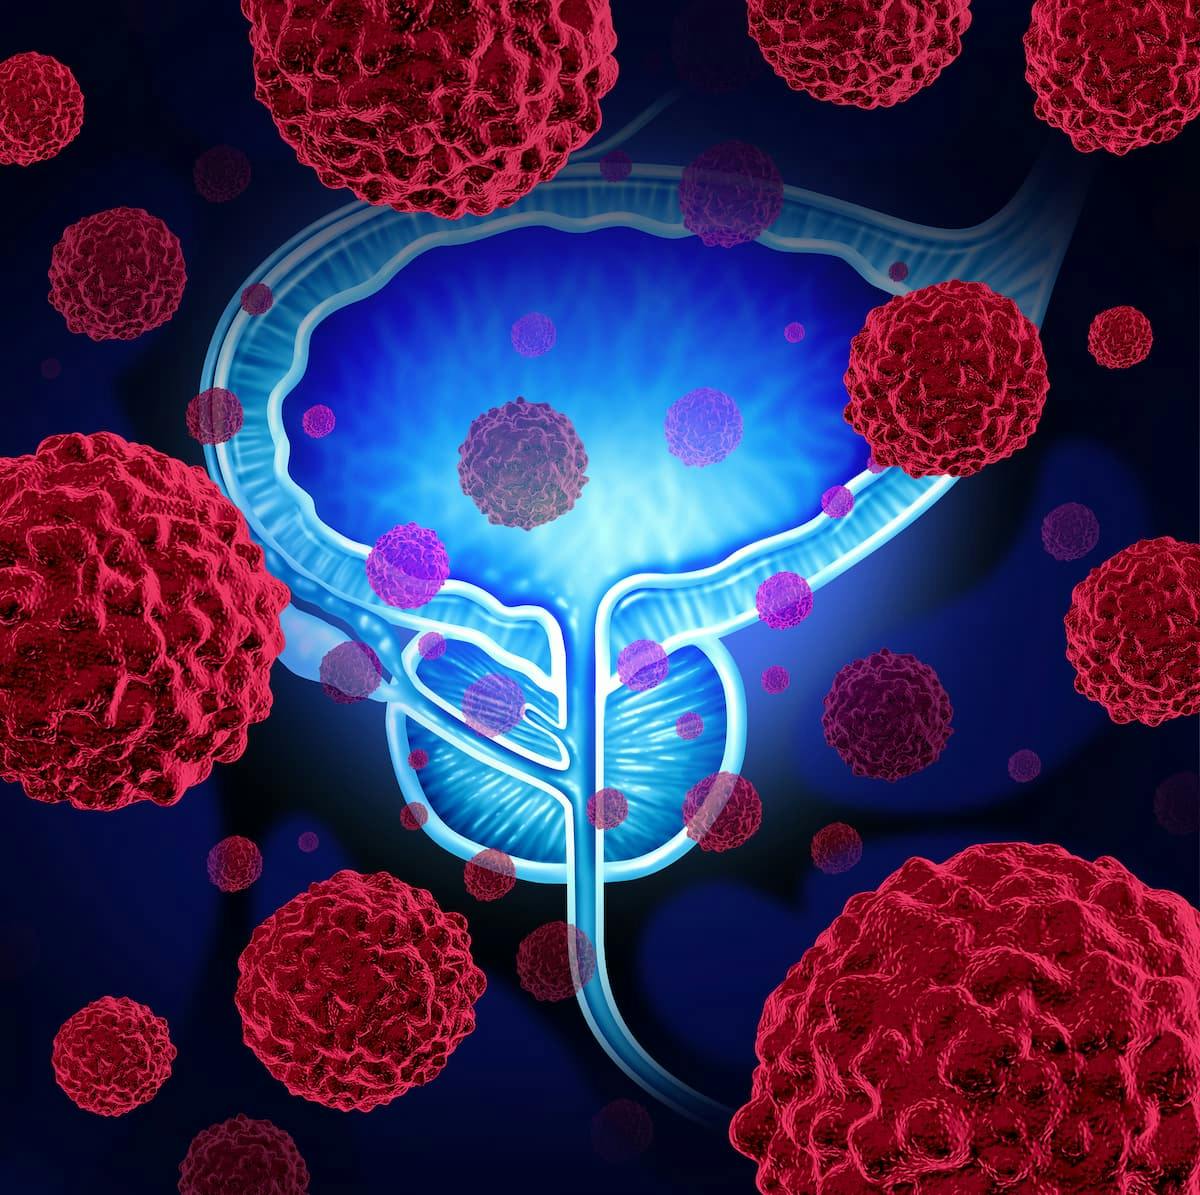 The investigational antibody-drug conjugate ARX517 is currently under evaluation in patients with metastatic castration-resistant prostate cancer as part of the phase 1/2 APEX-01 trial.